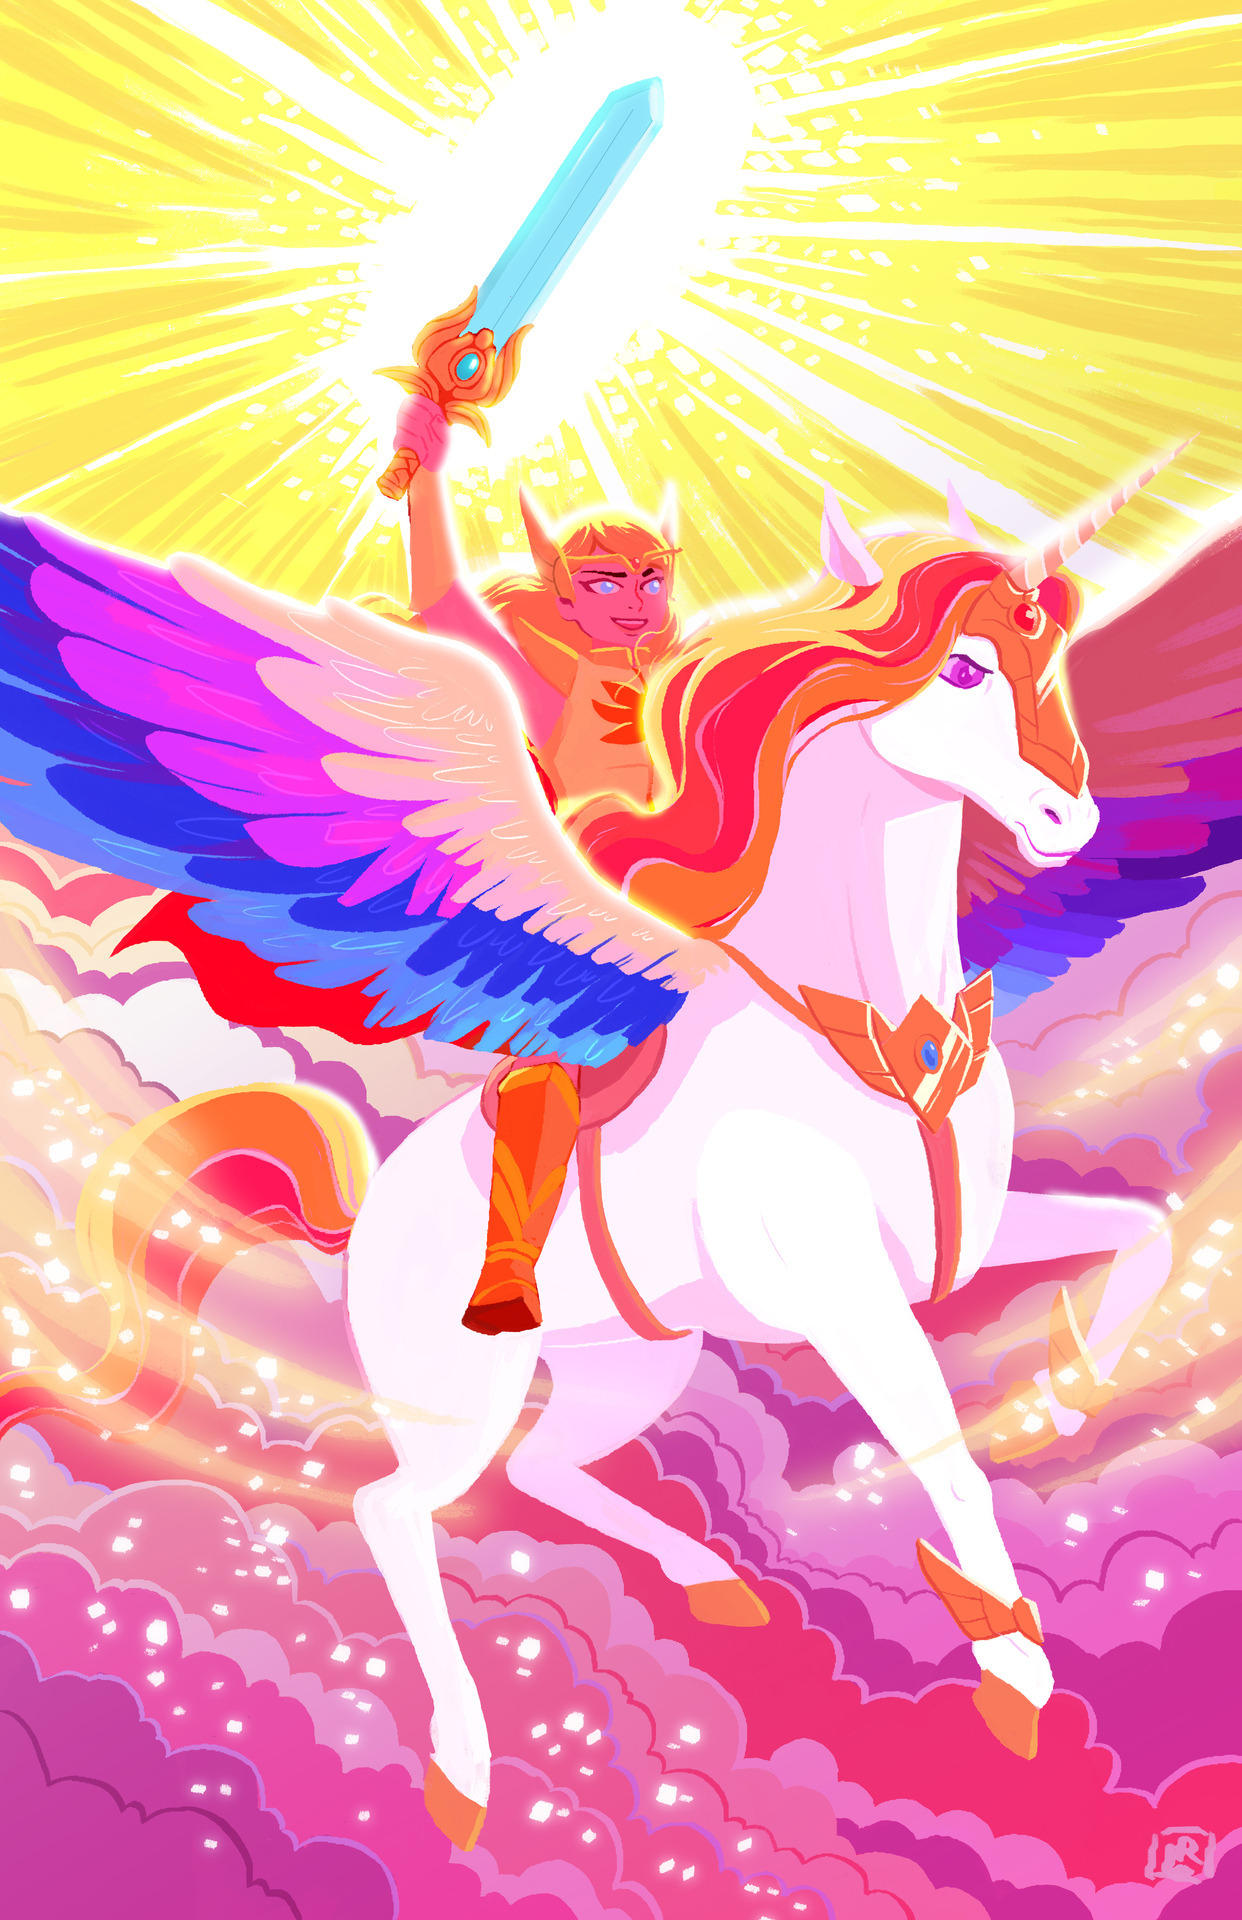 om-nom-berries: Since She Ra is back, I finally sat down to do some art. That and